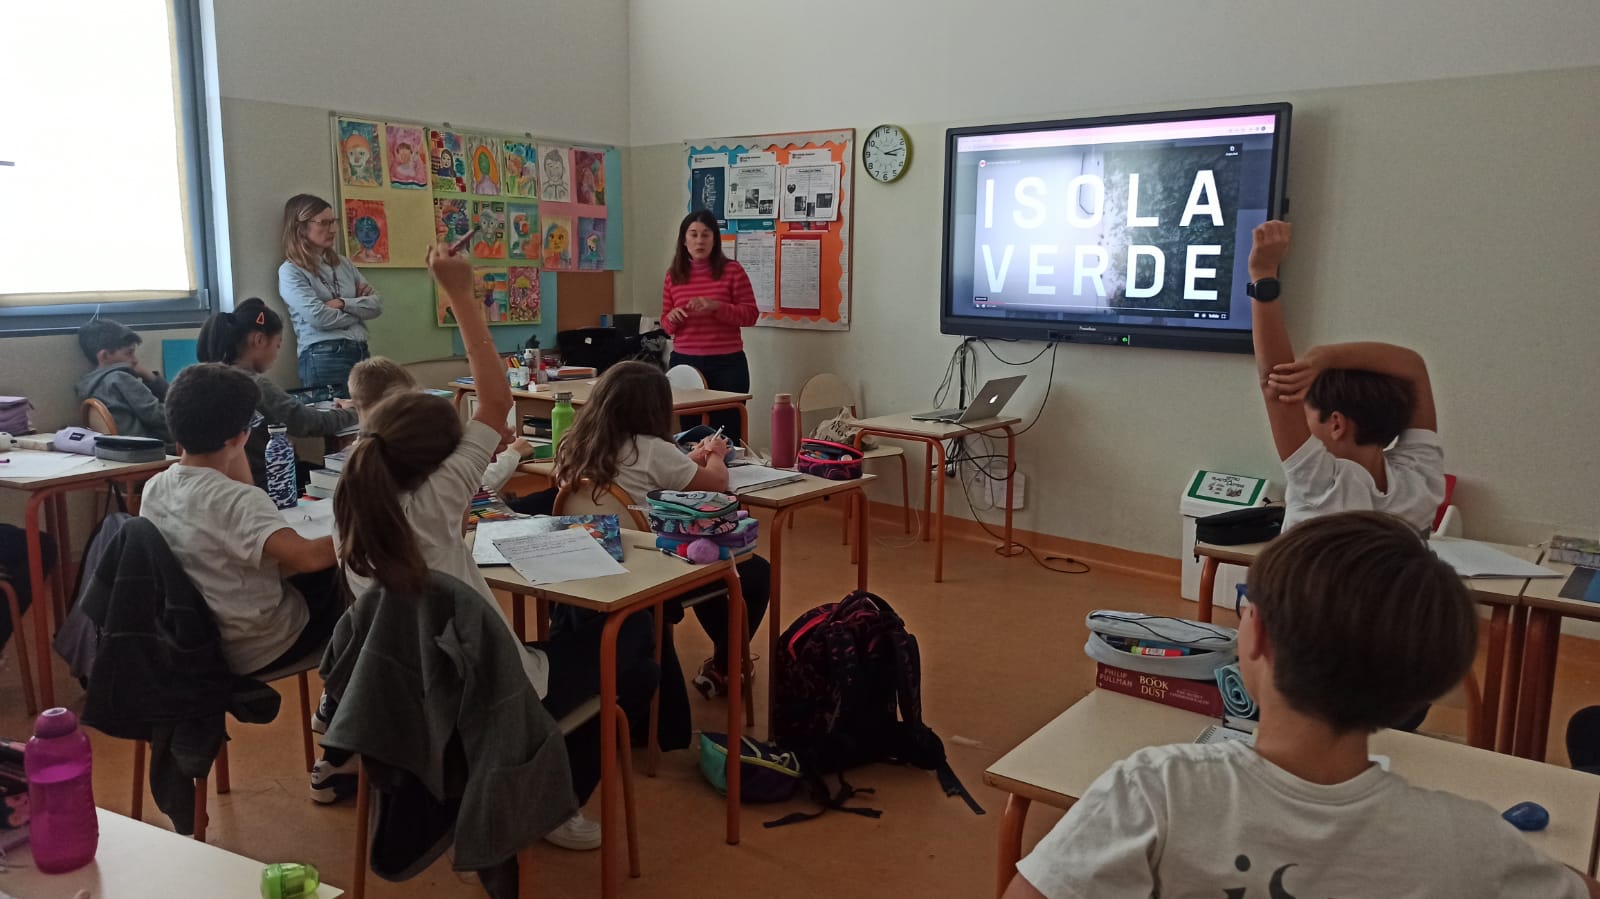 VLPF meets the students of the International School of Venice Middle School